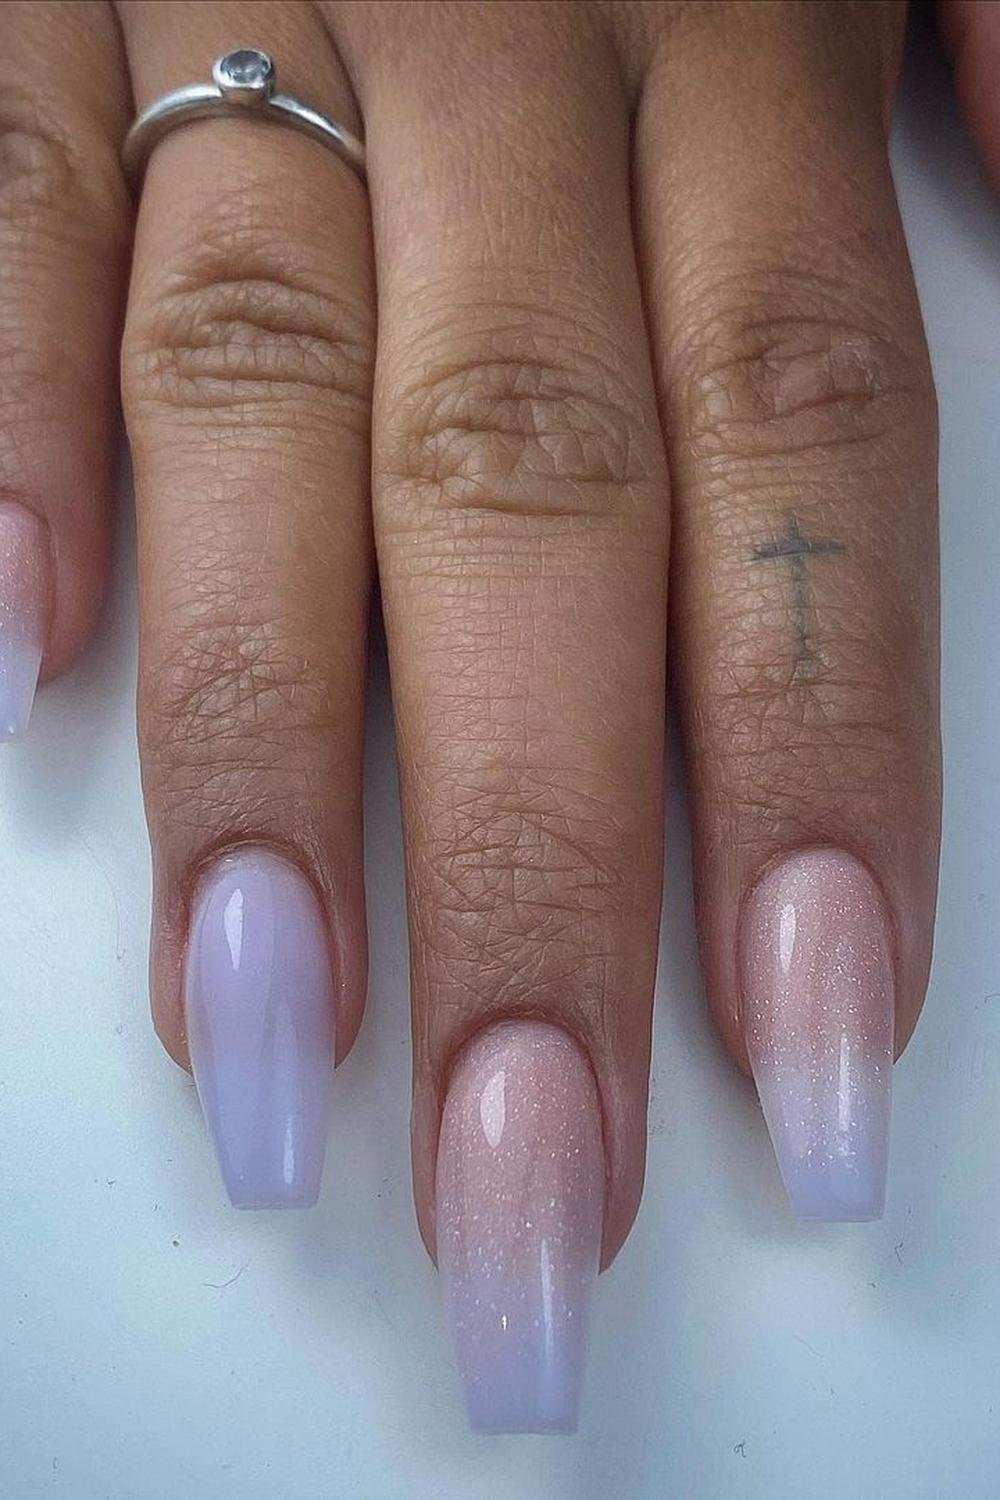 12 - Picture of Ballerina Nails